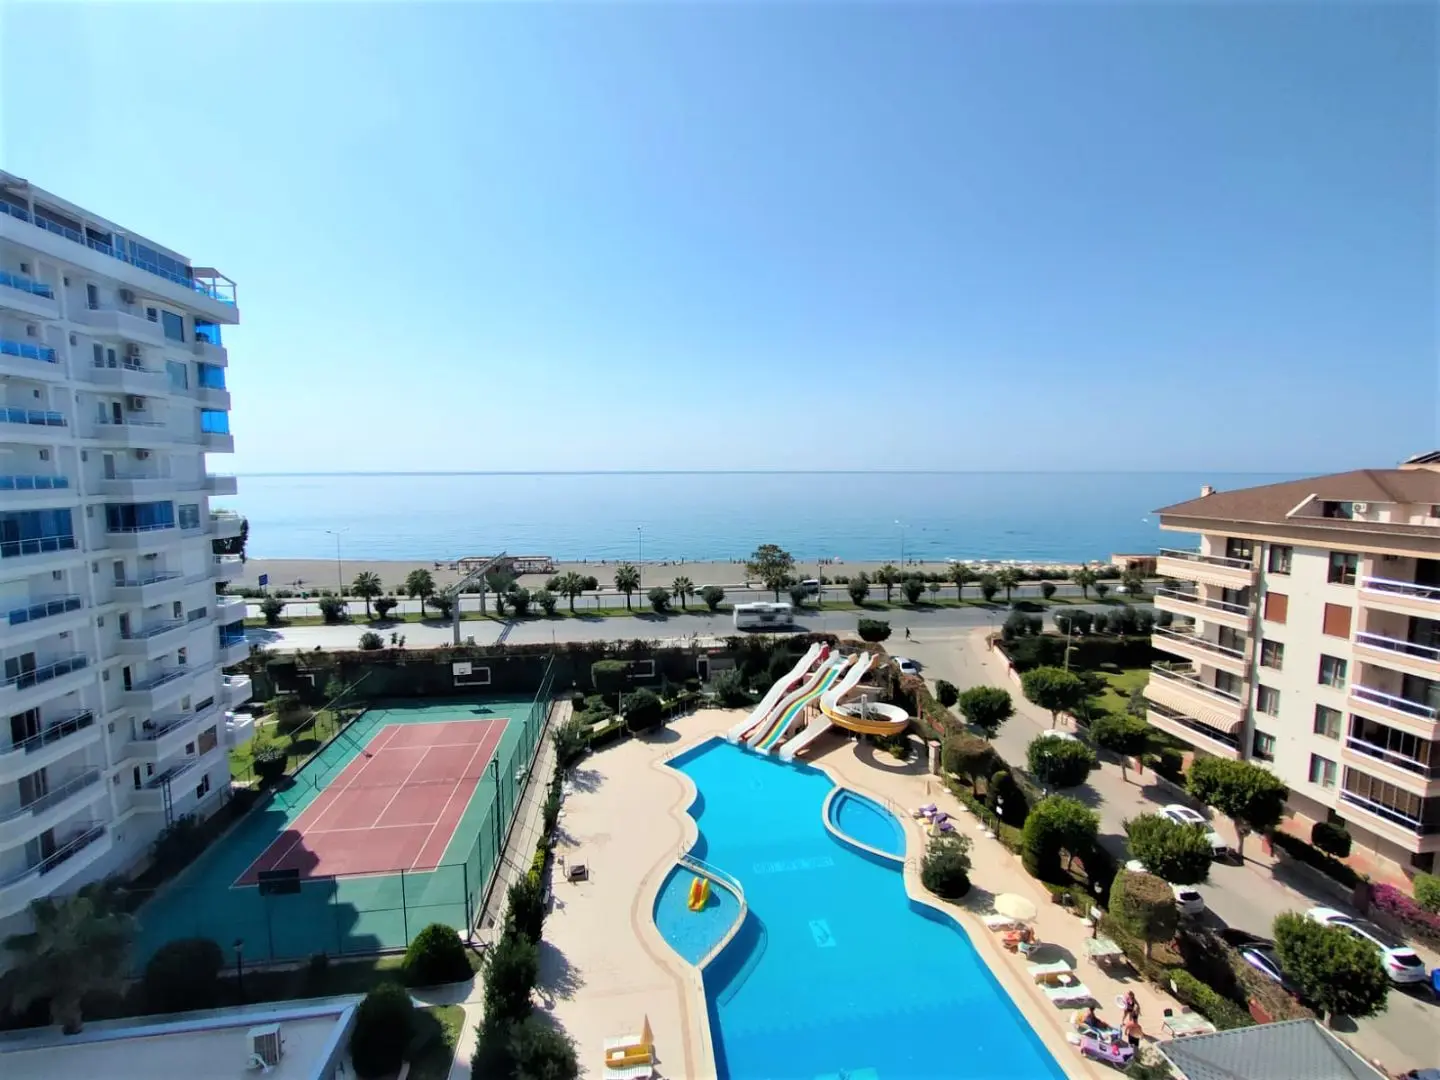 FRONT BEACH LİNE APARTMENT FOR SALE WİTH A BALCONY OVERLOOKİNG THE SEA